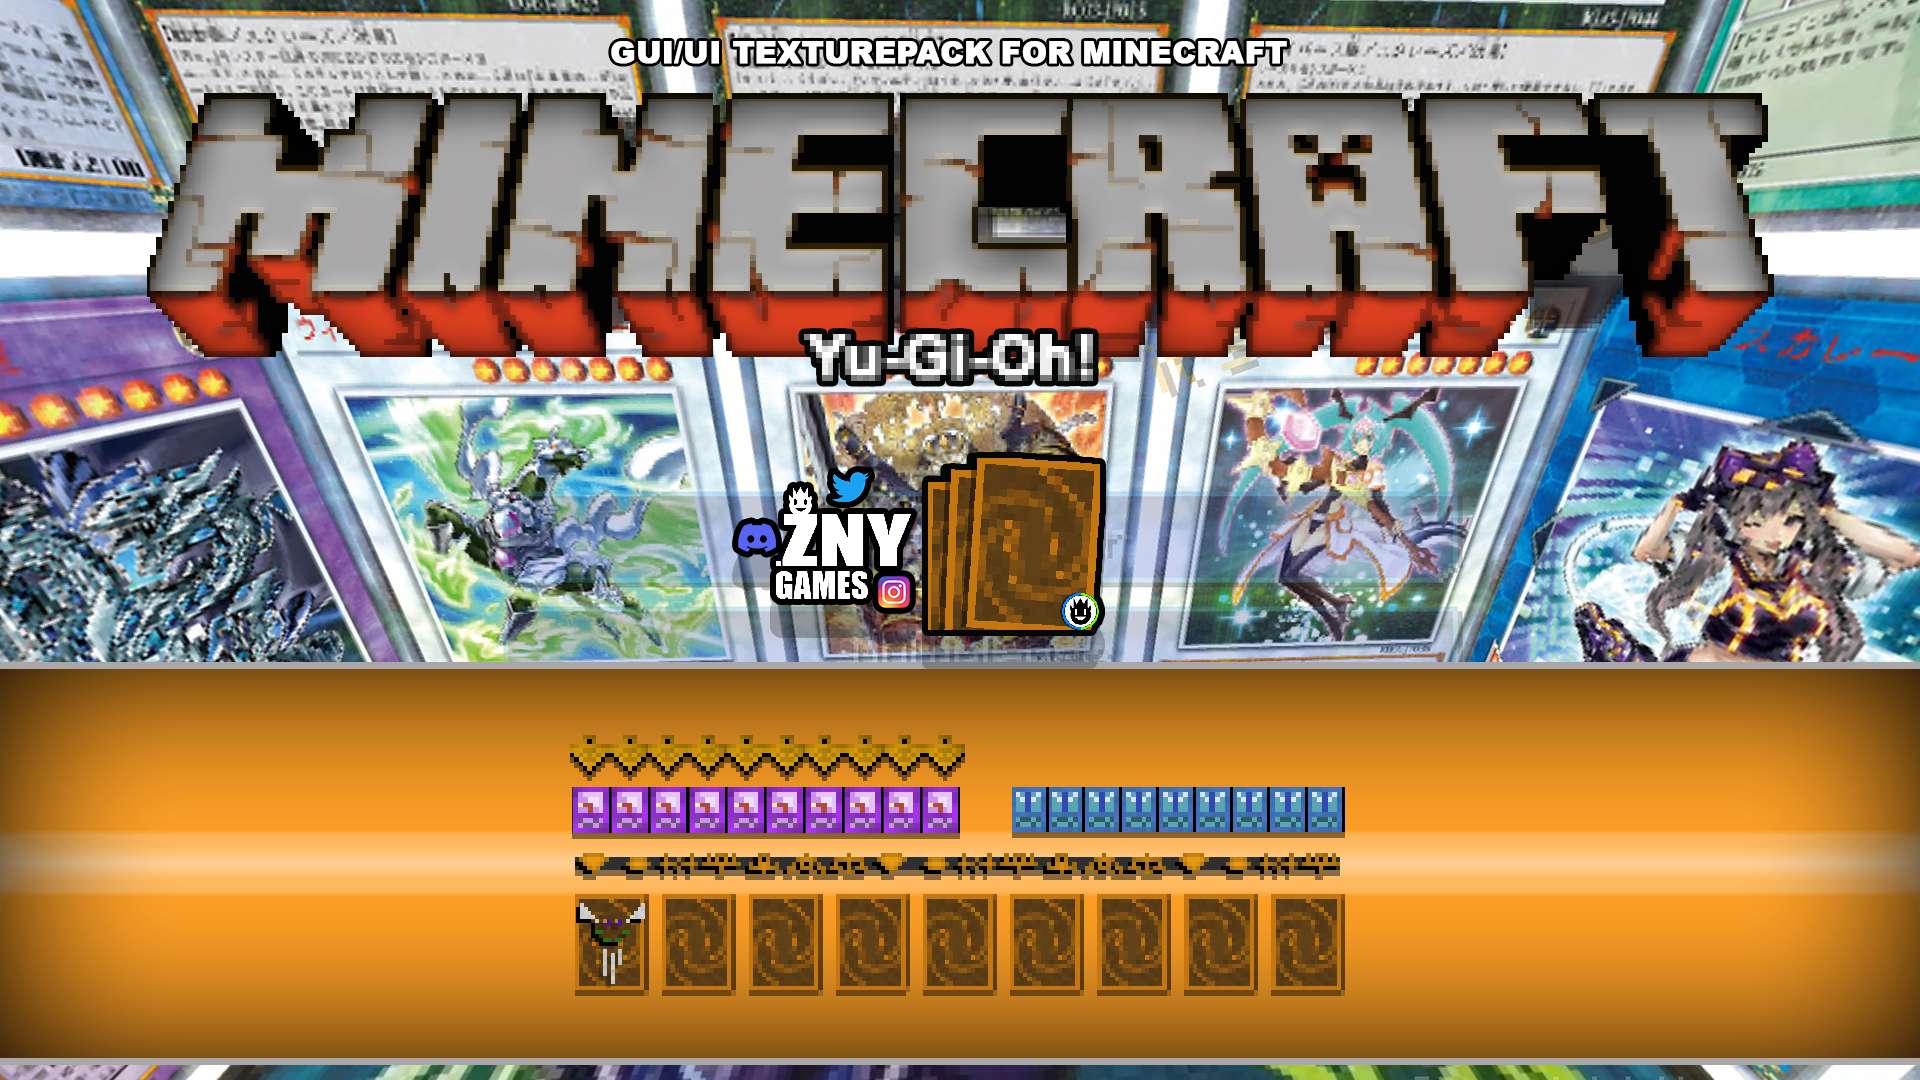 YU-GI-OH! [BEDROCK] 16x by znygames & zny games on PvPRP